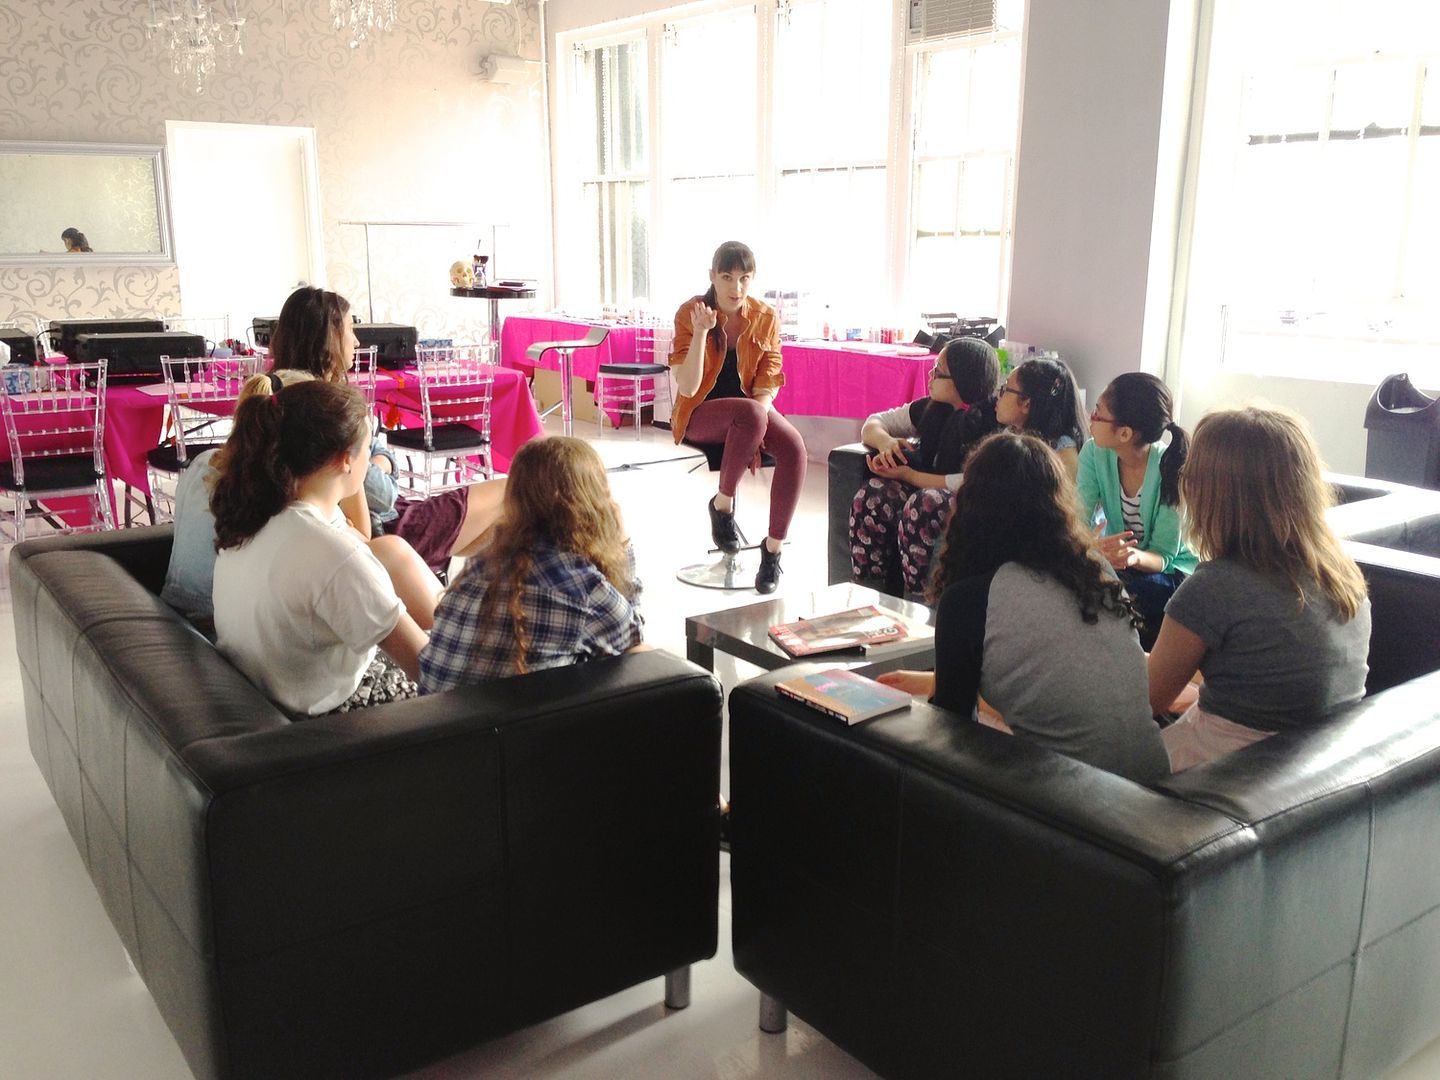 BeautyCamp NYC helps develop confidence and self-esteem in teens